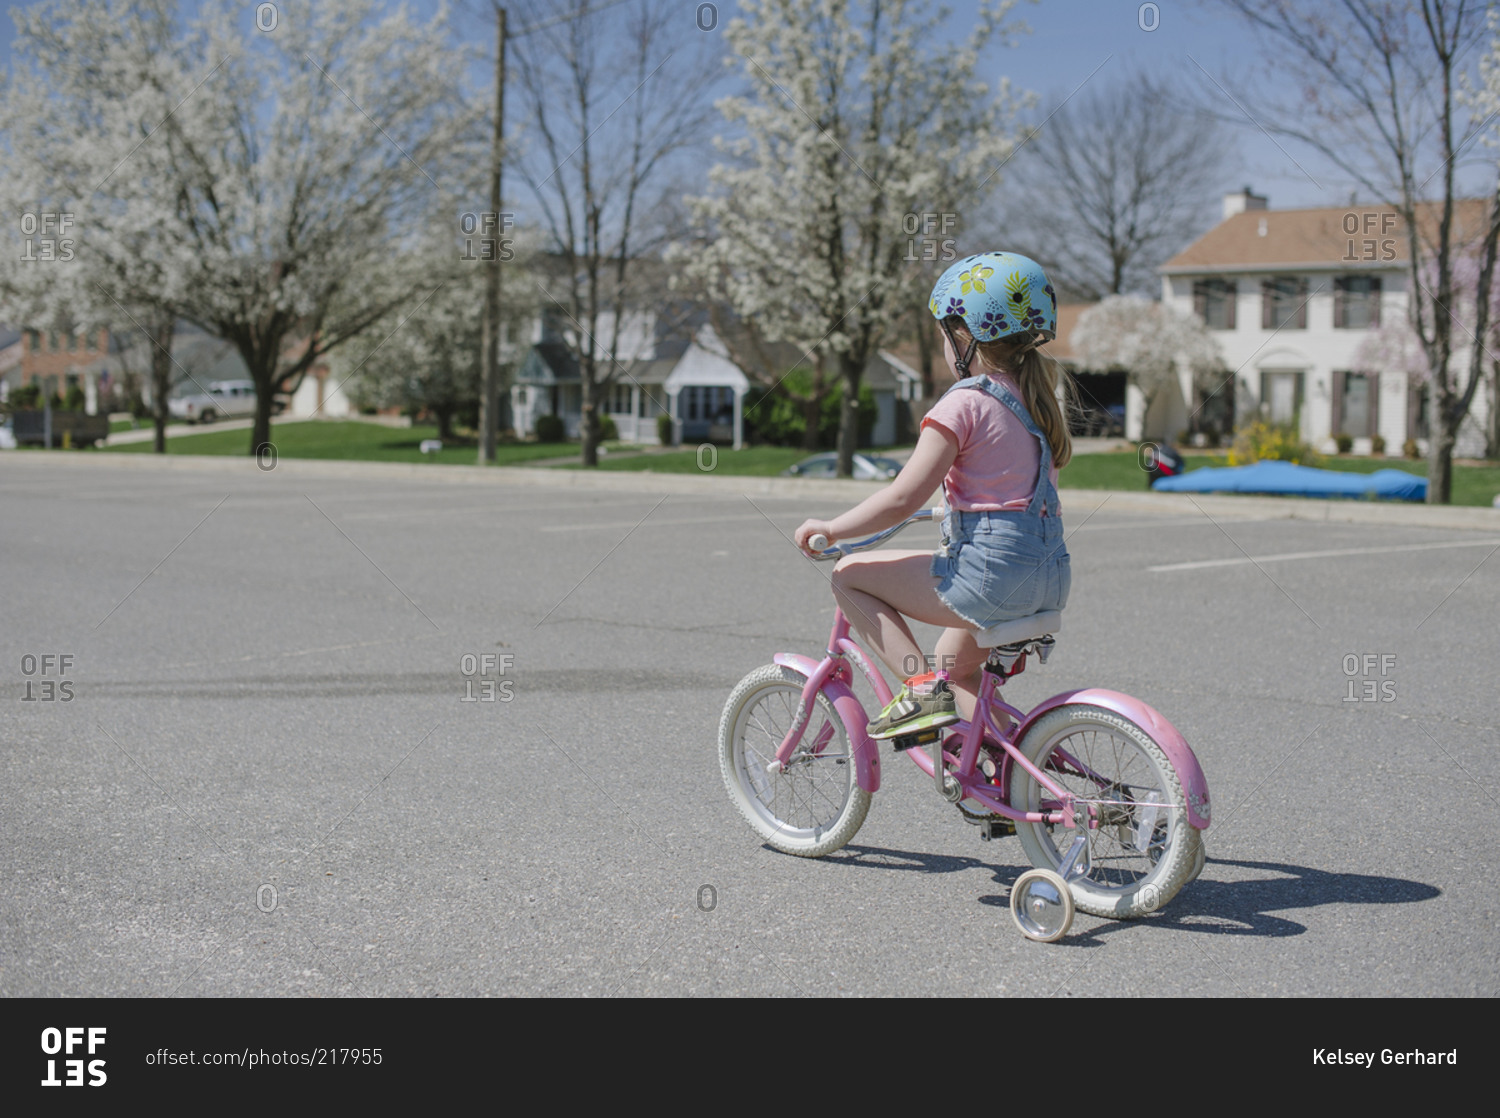 Little girl riding a pink bike with training wheels